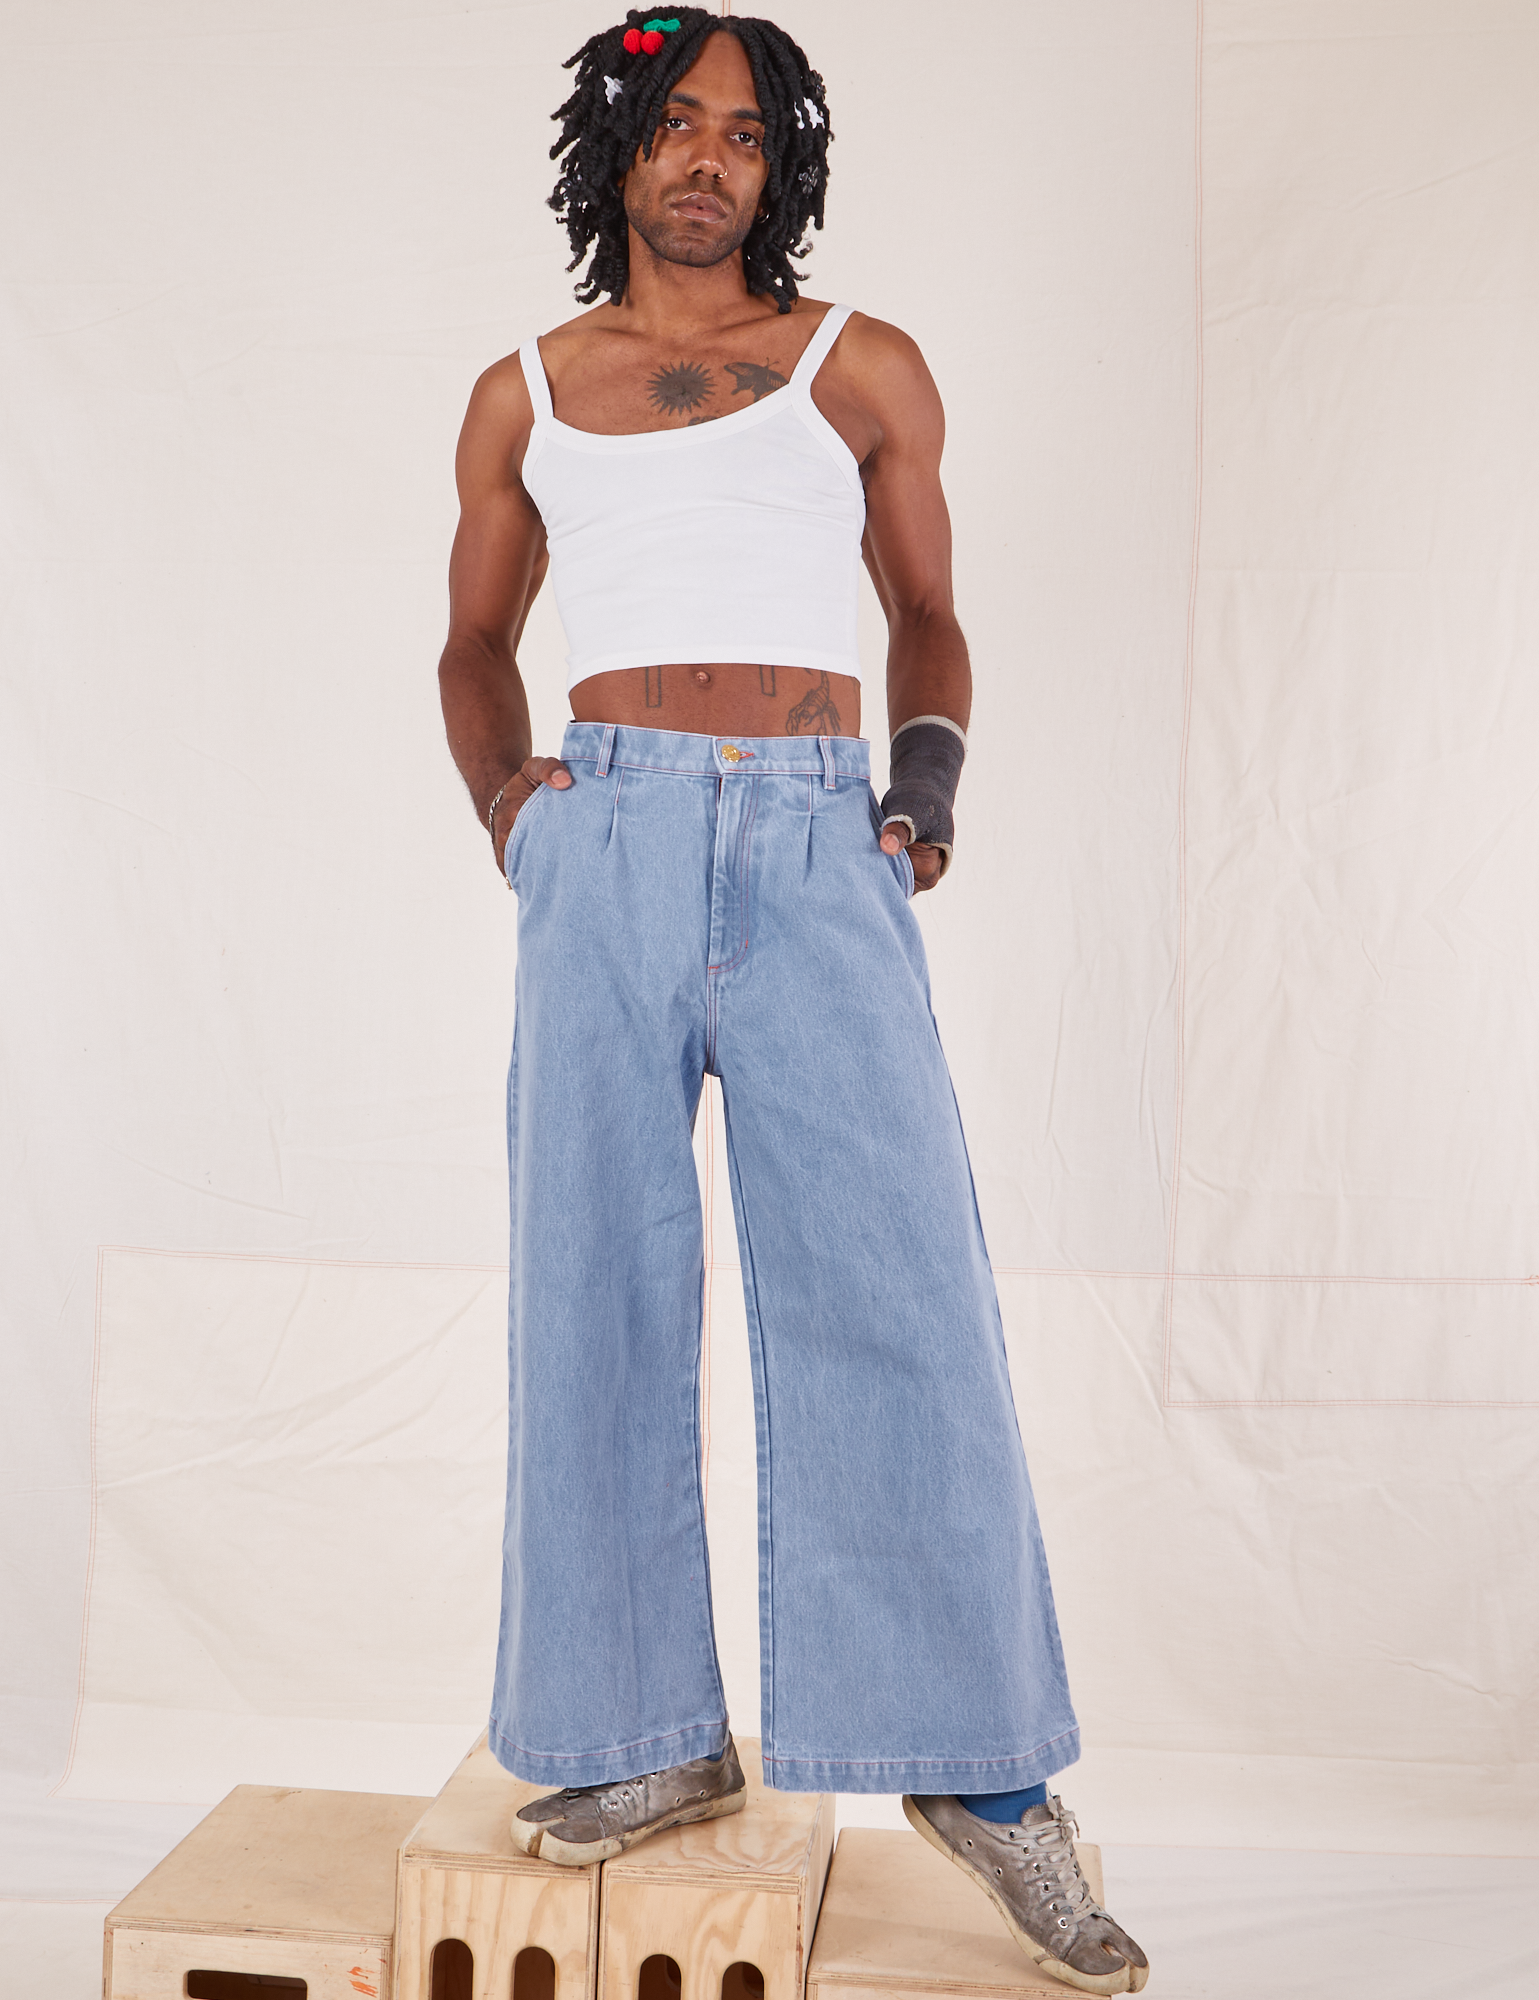 Jerrod is wearing Indigo Wide Leg Trousers in Light Wash and vintage off-white Cami